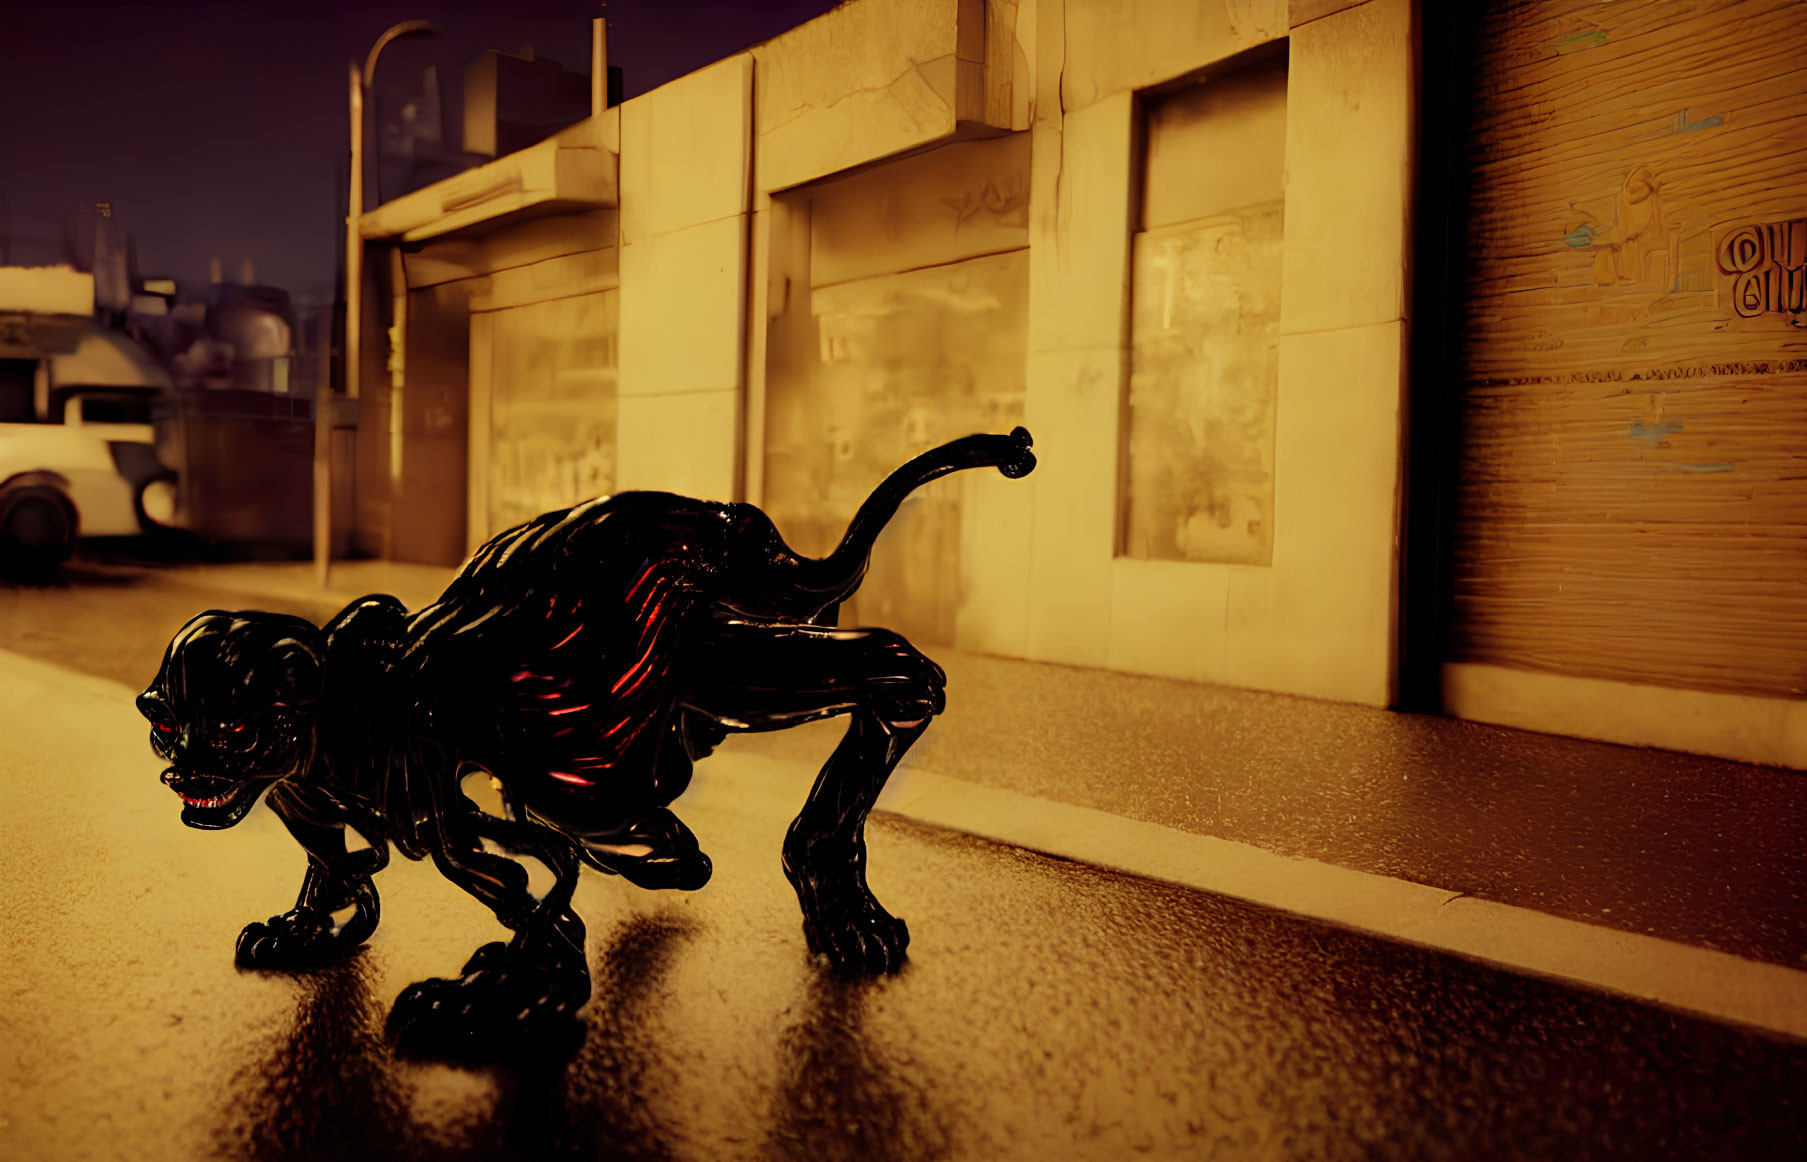 Black panther with red accents prowls deserted urban street at night